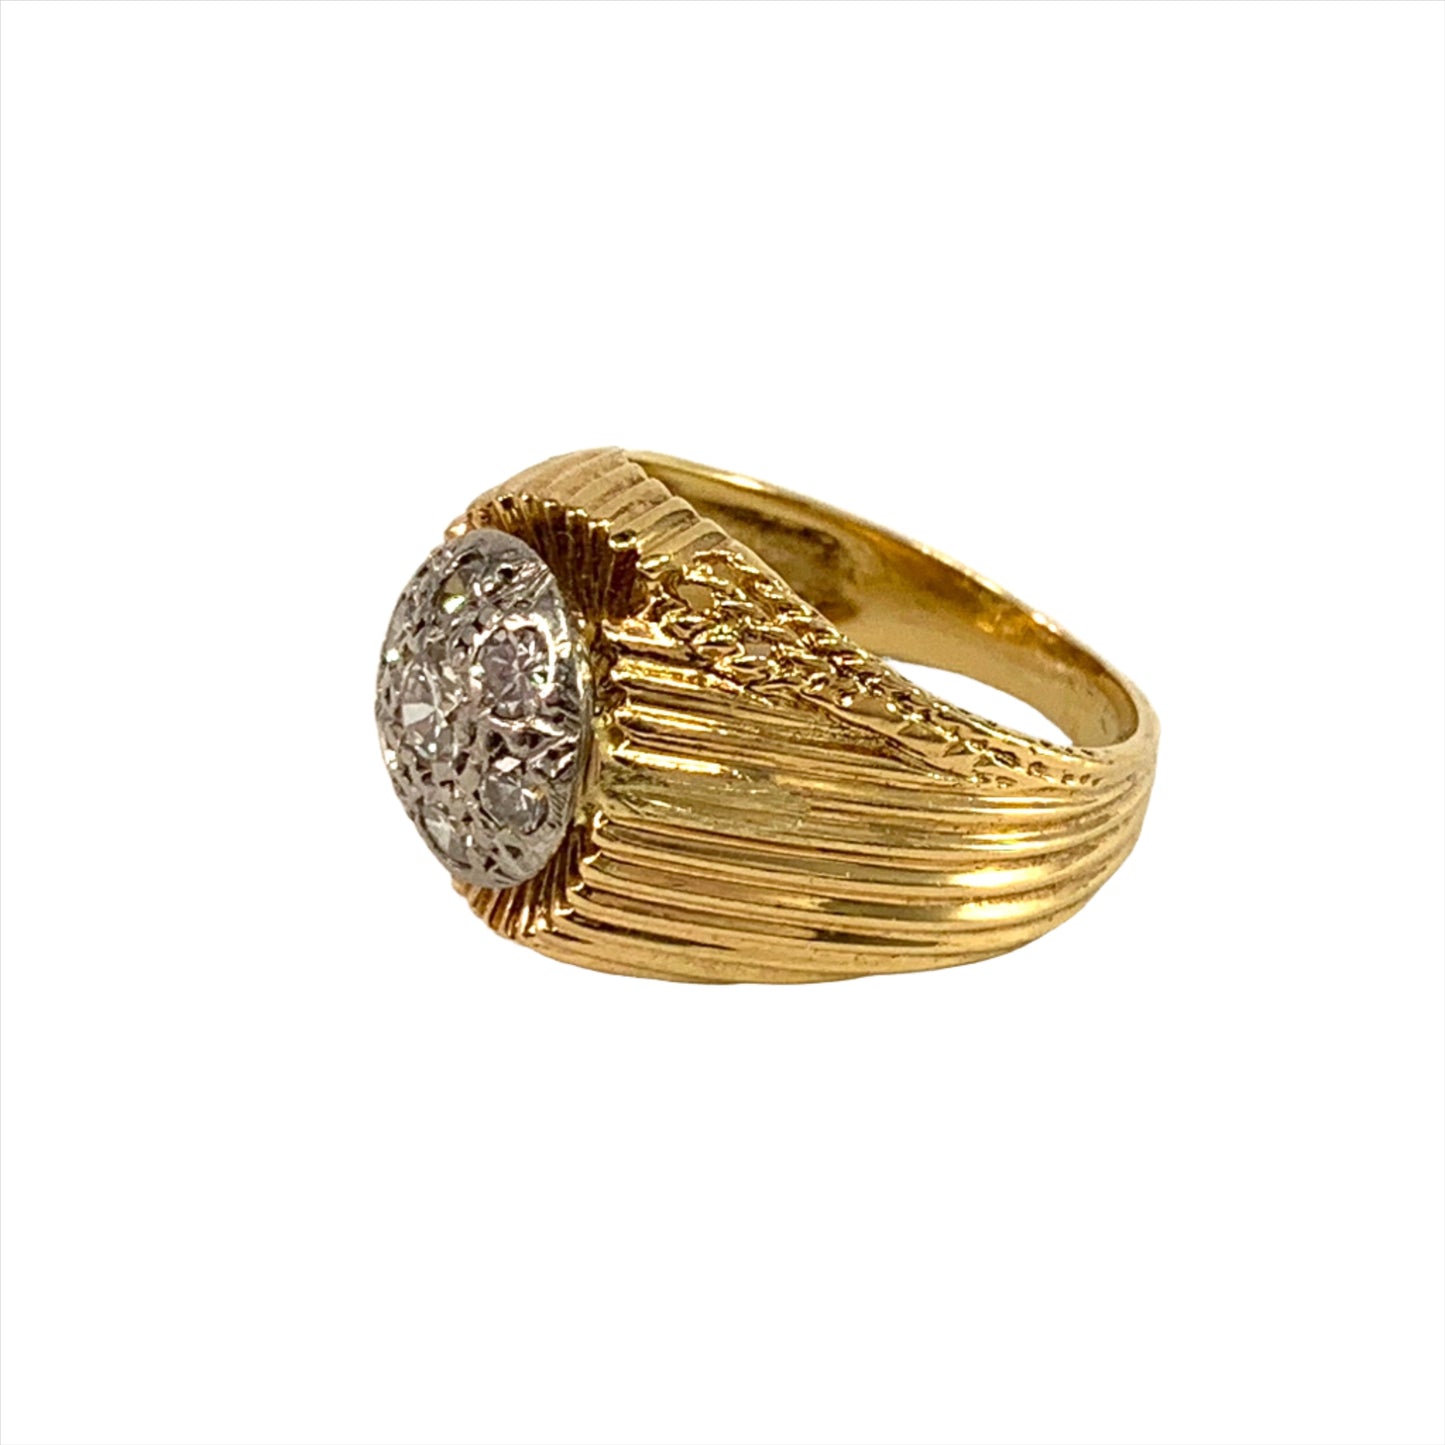 1960s 18k Gold Diamond Dome Cocktail Ring